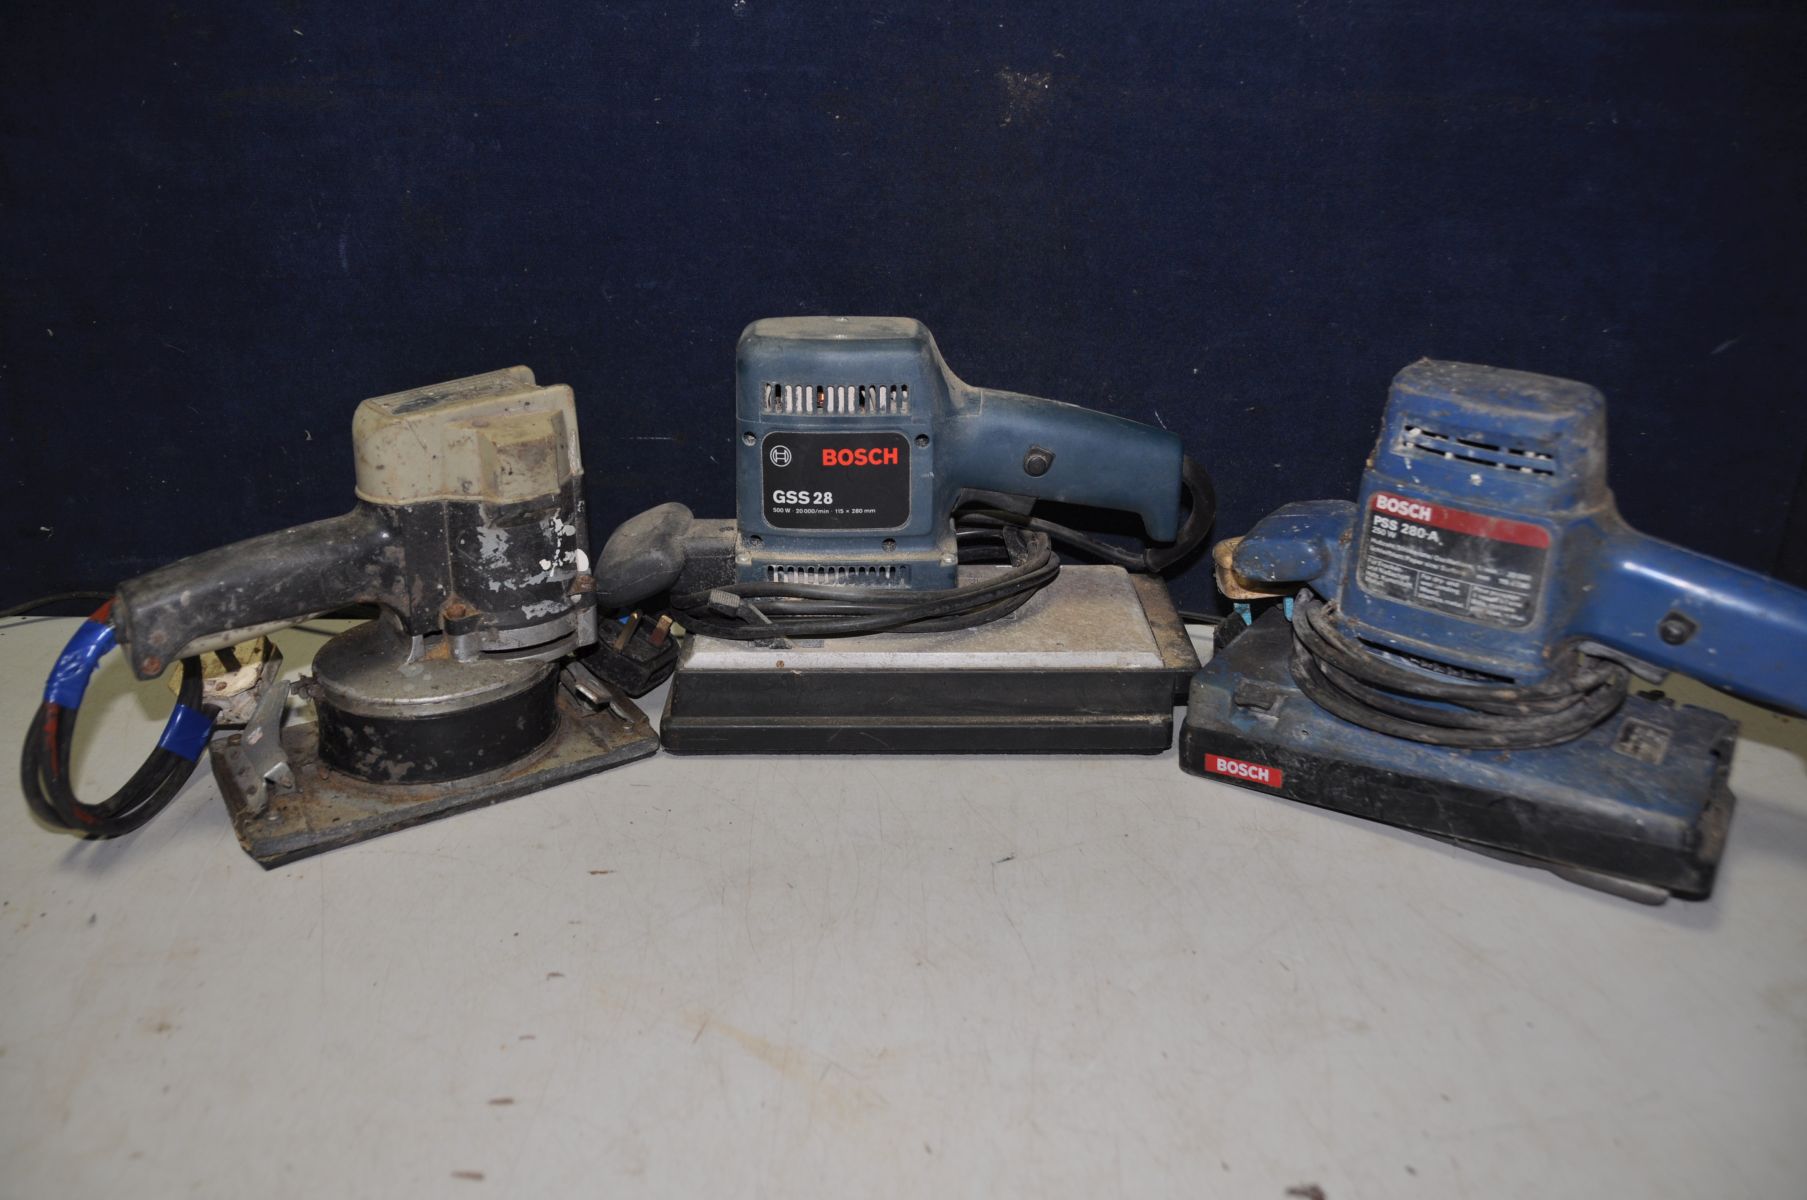 THREE HAND SANDERS comprising a Bosch PSS-280-A, Bosch GSS-28 and a Rupes SS70 (all PAT pass and